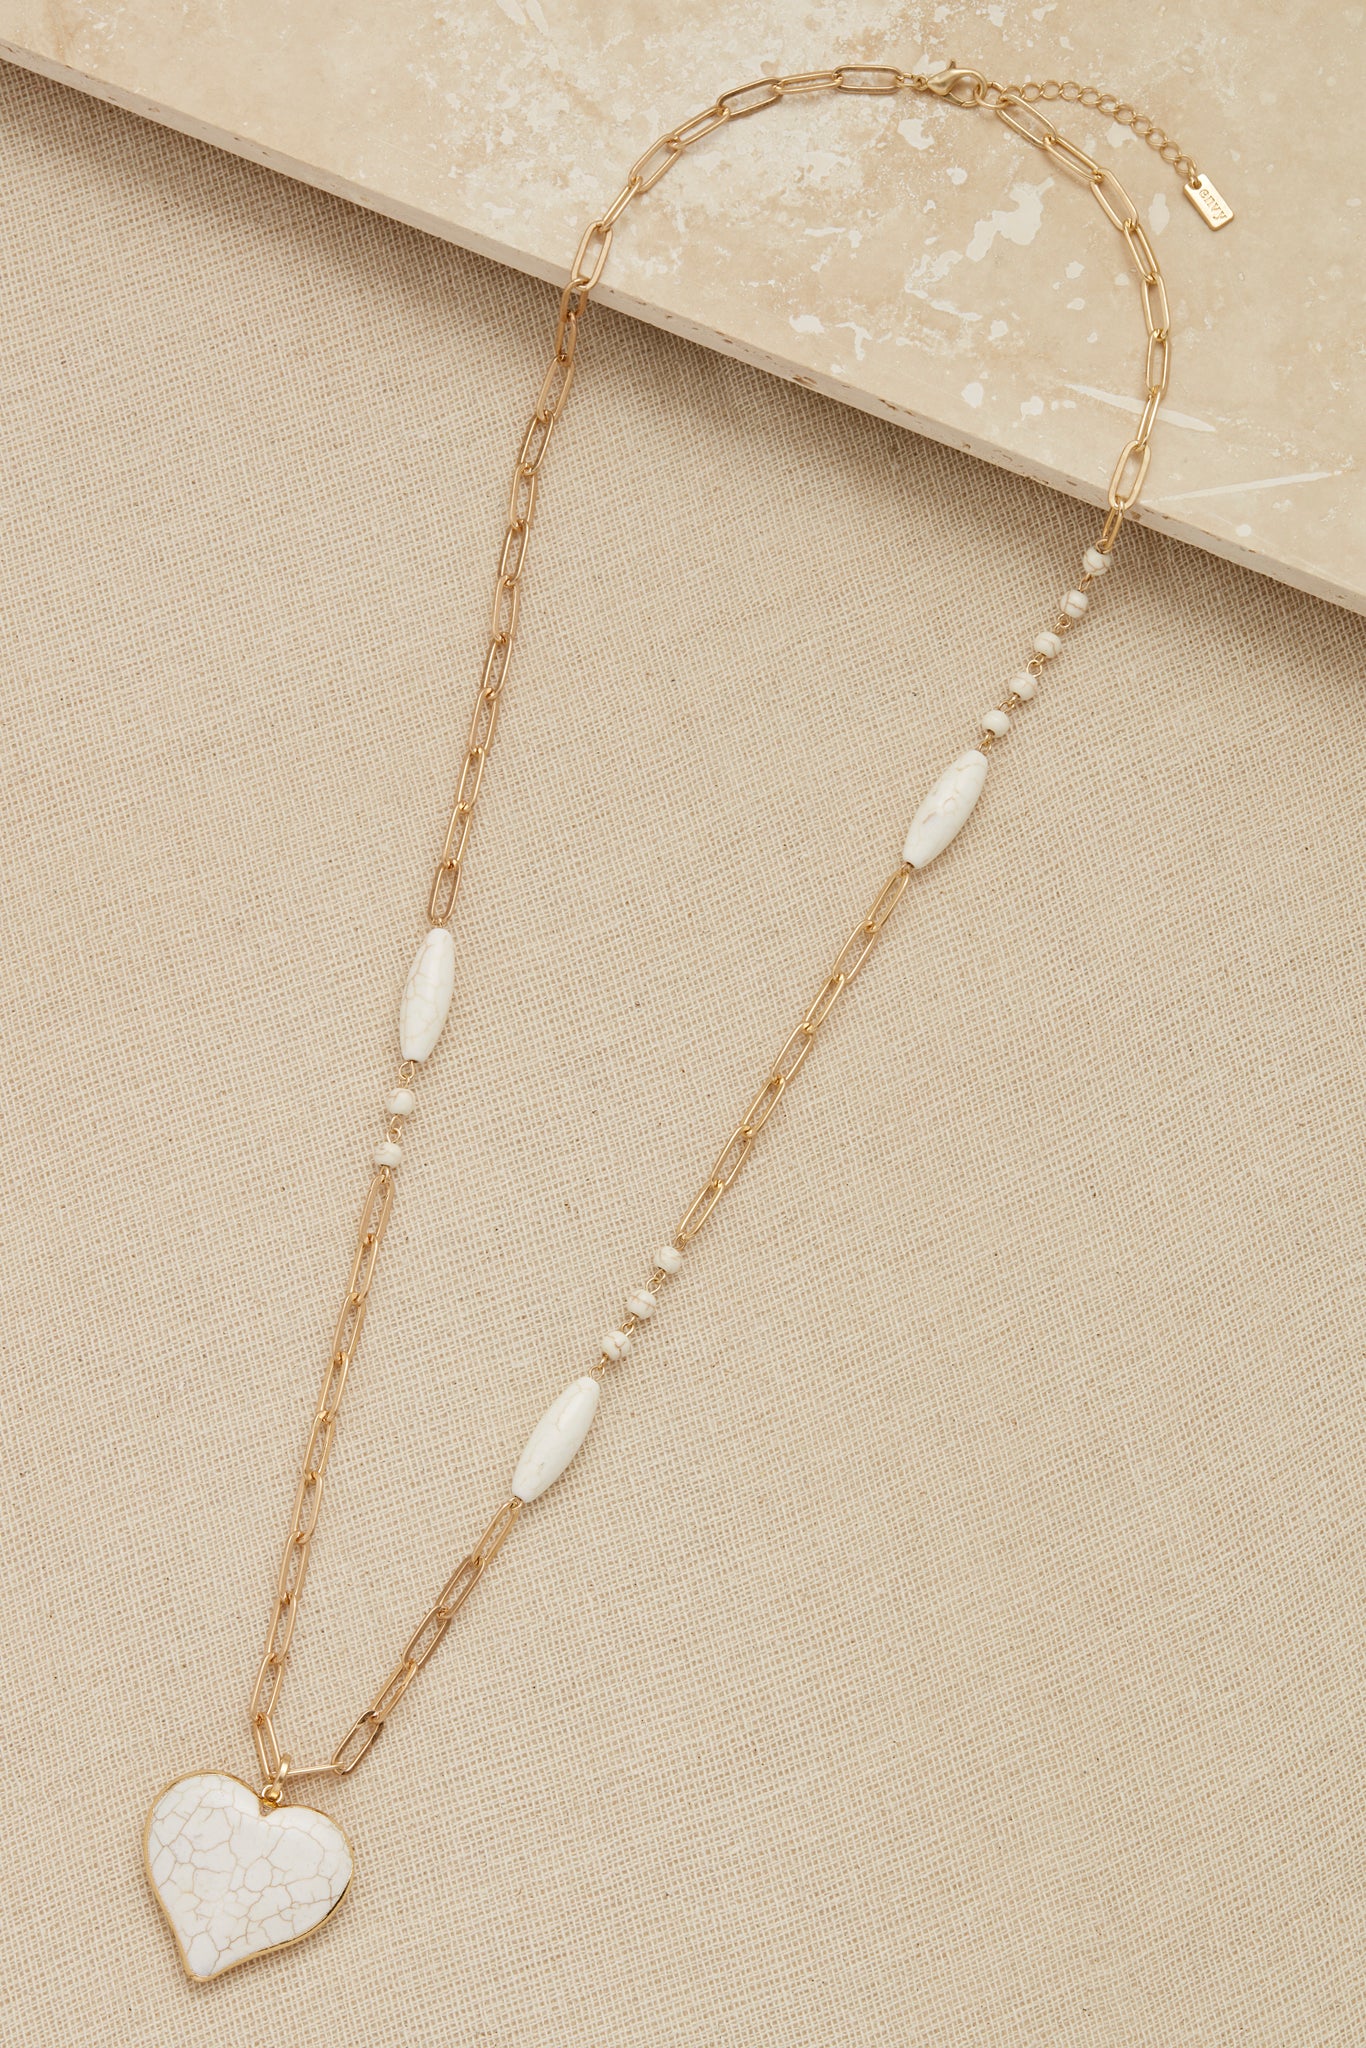 Long Gold Necklace with White Howlite